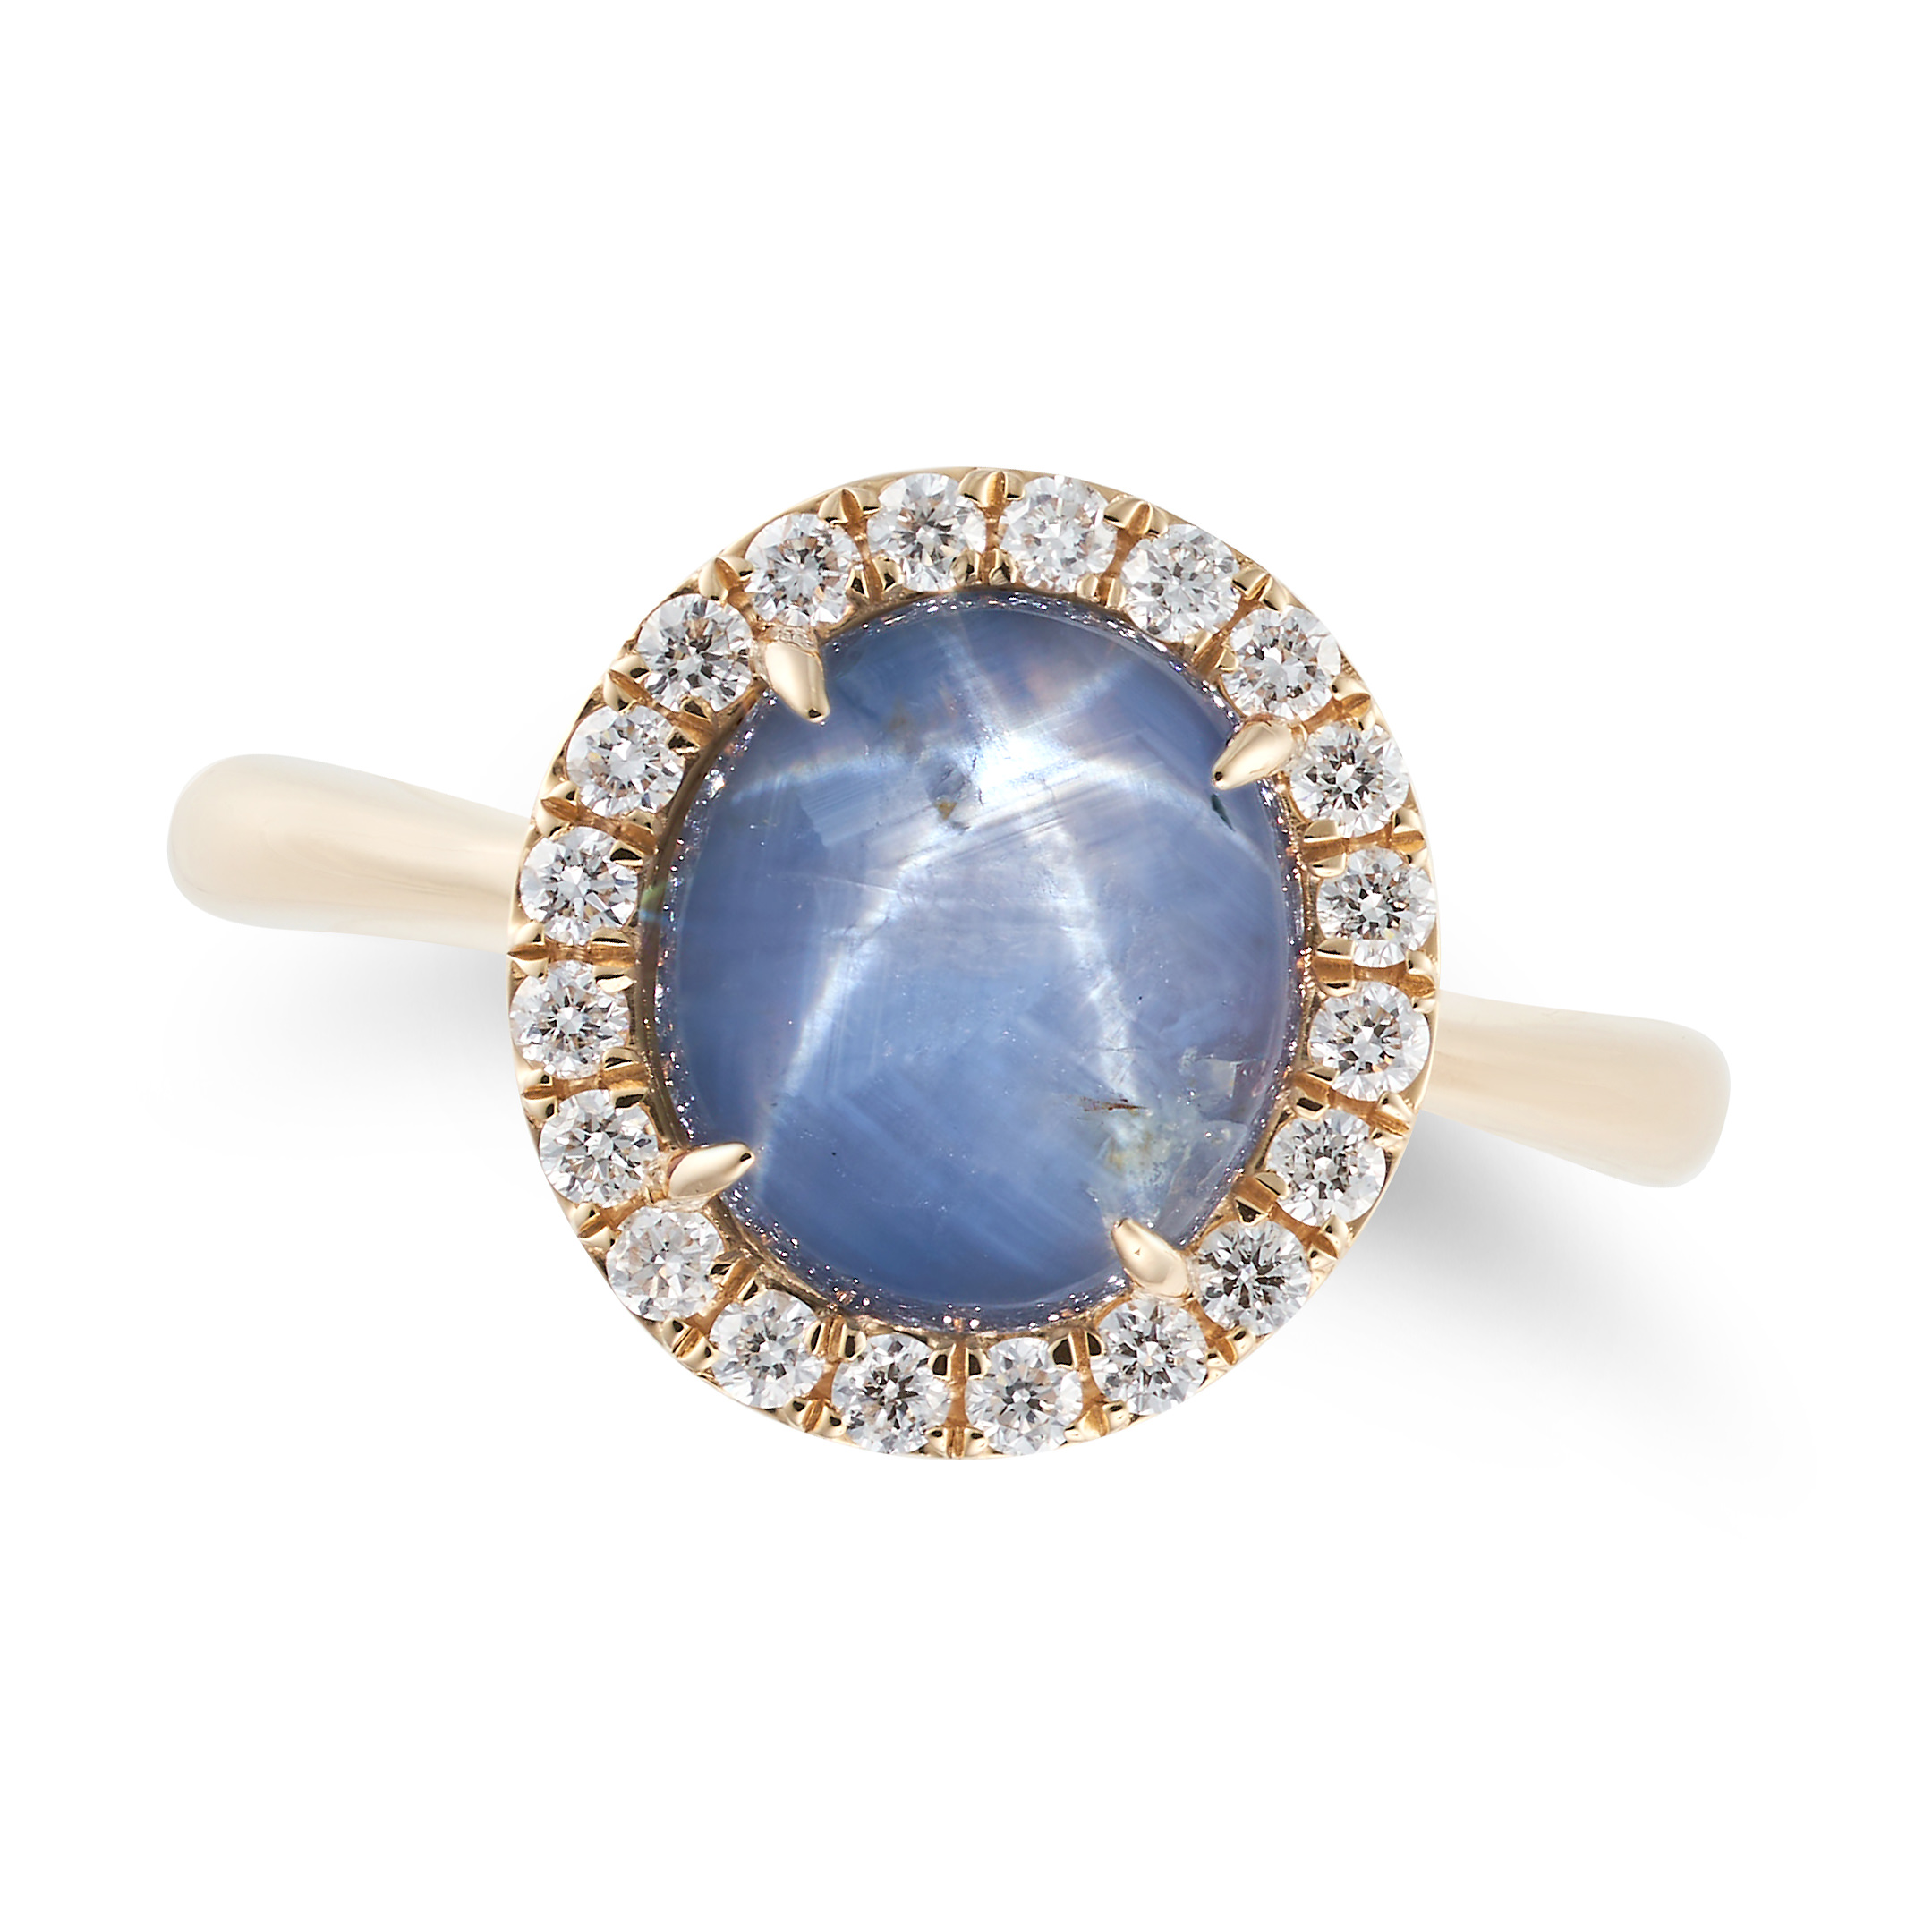 A STAR SAPPHIRE AND DIAMOND RING set with a round cabochon star sapphire of 6.16 carats in a bord...